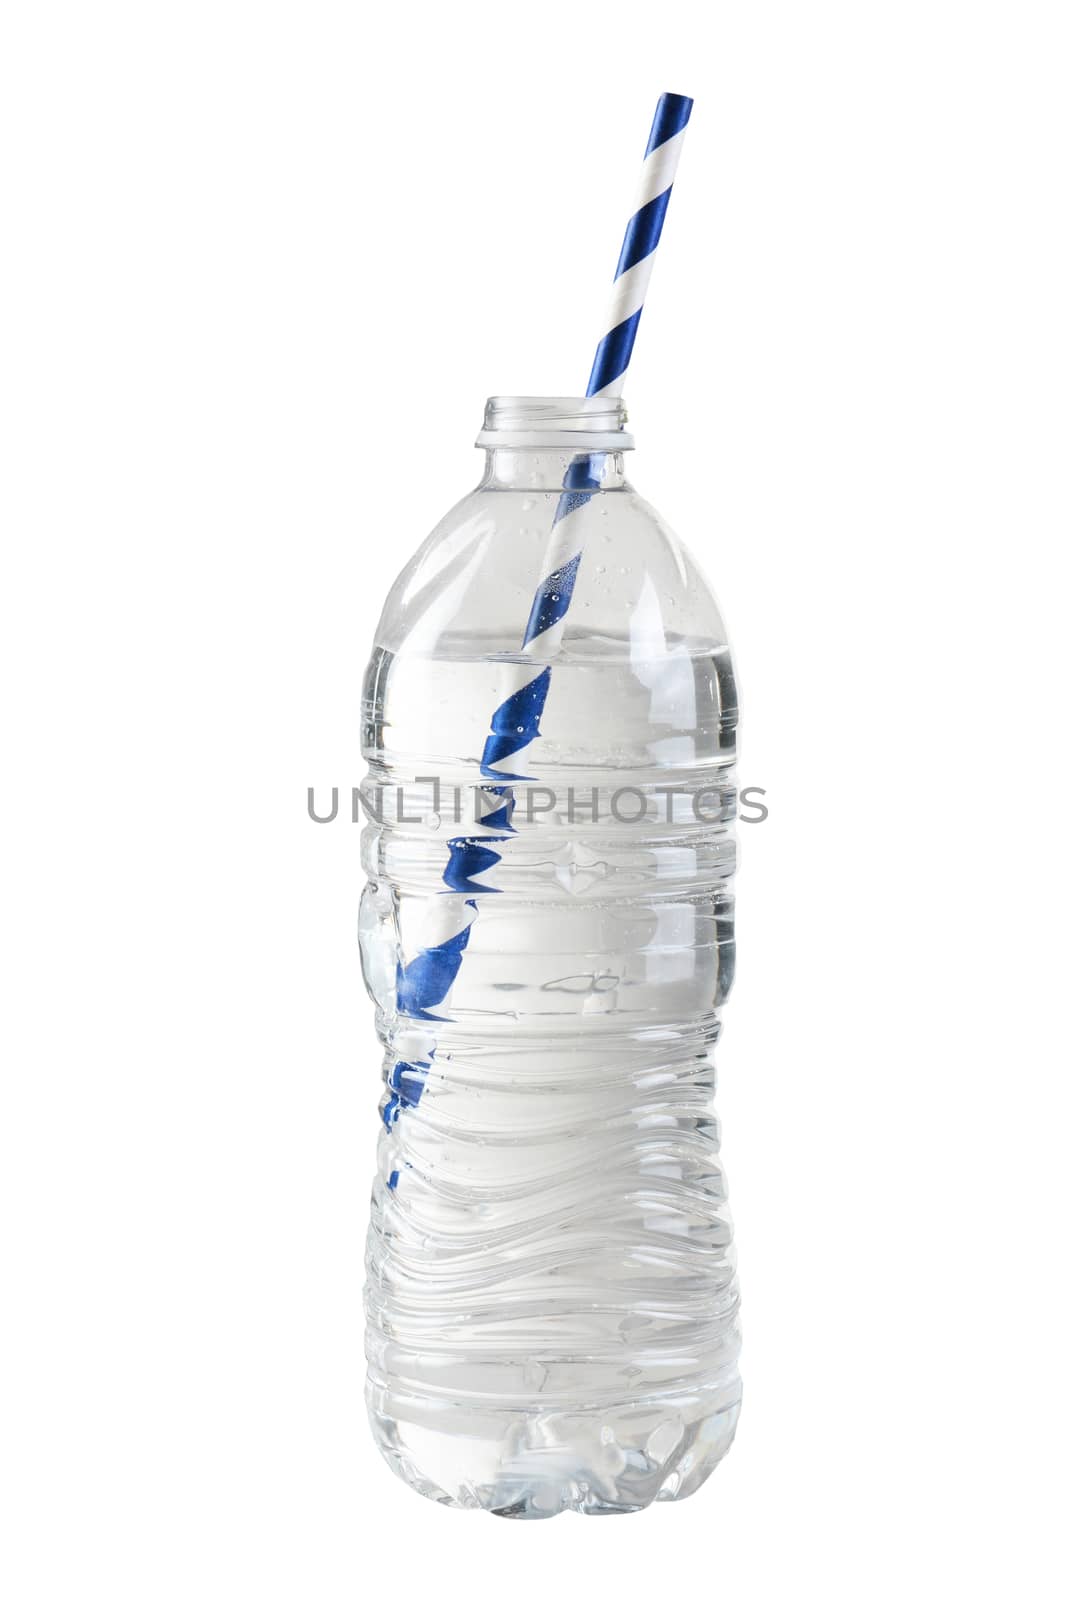 Closeup of a clear plastic water bottle with a blue and white striped paper drinking straw.